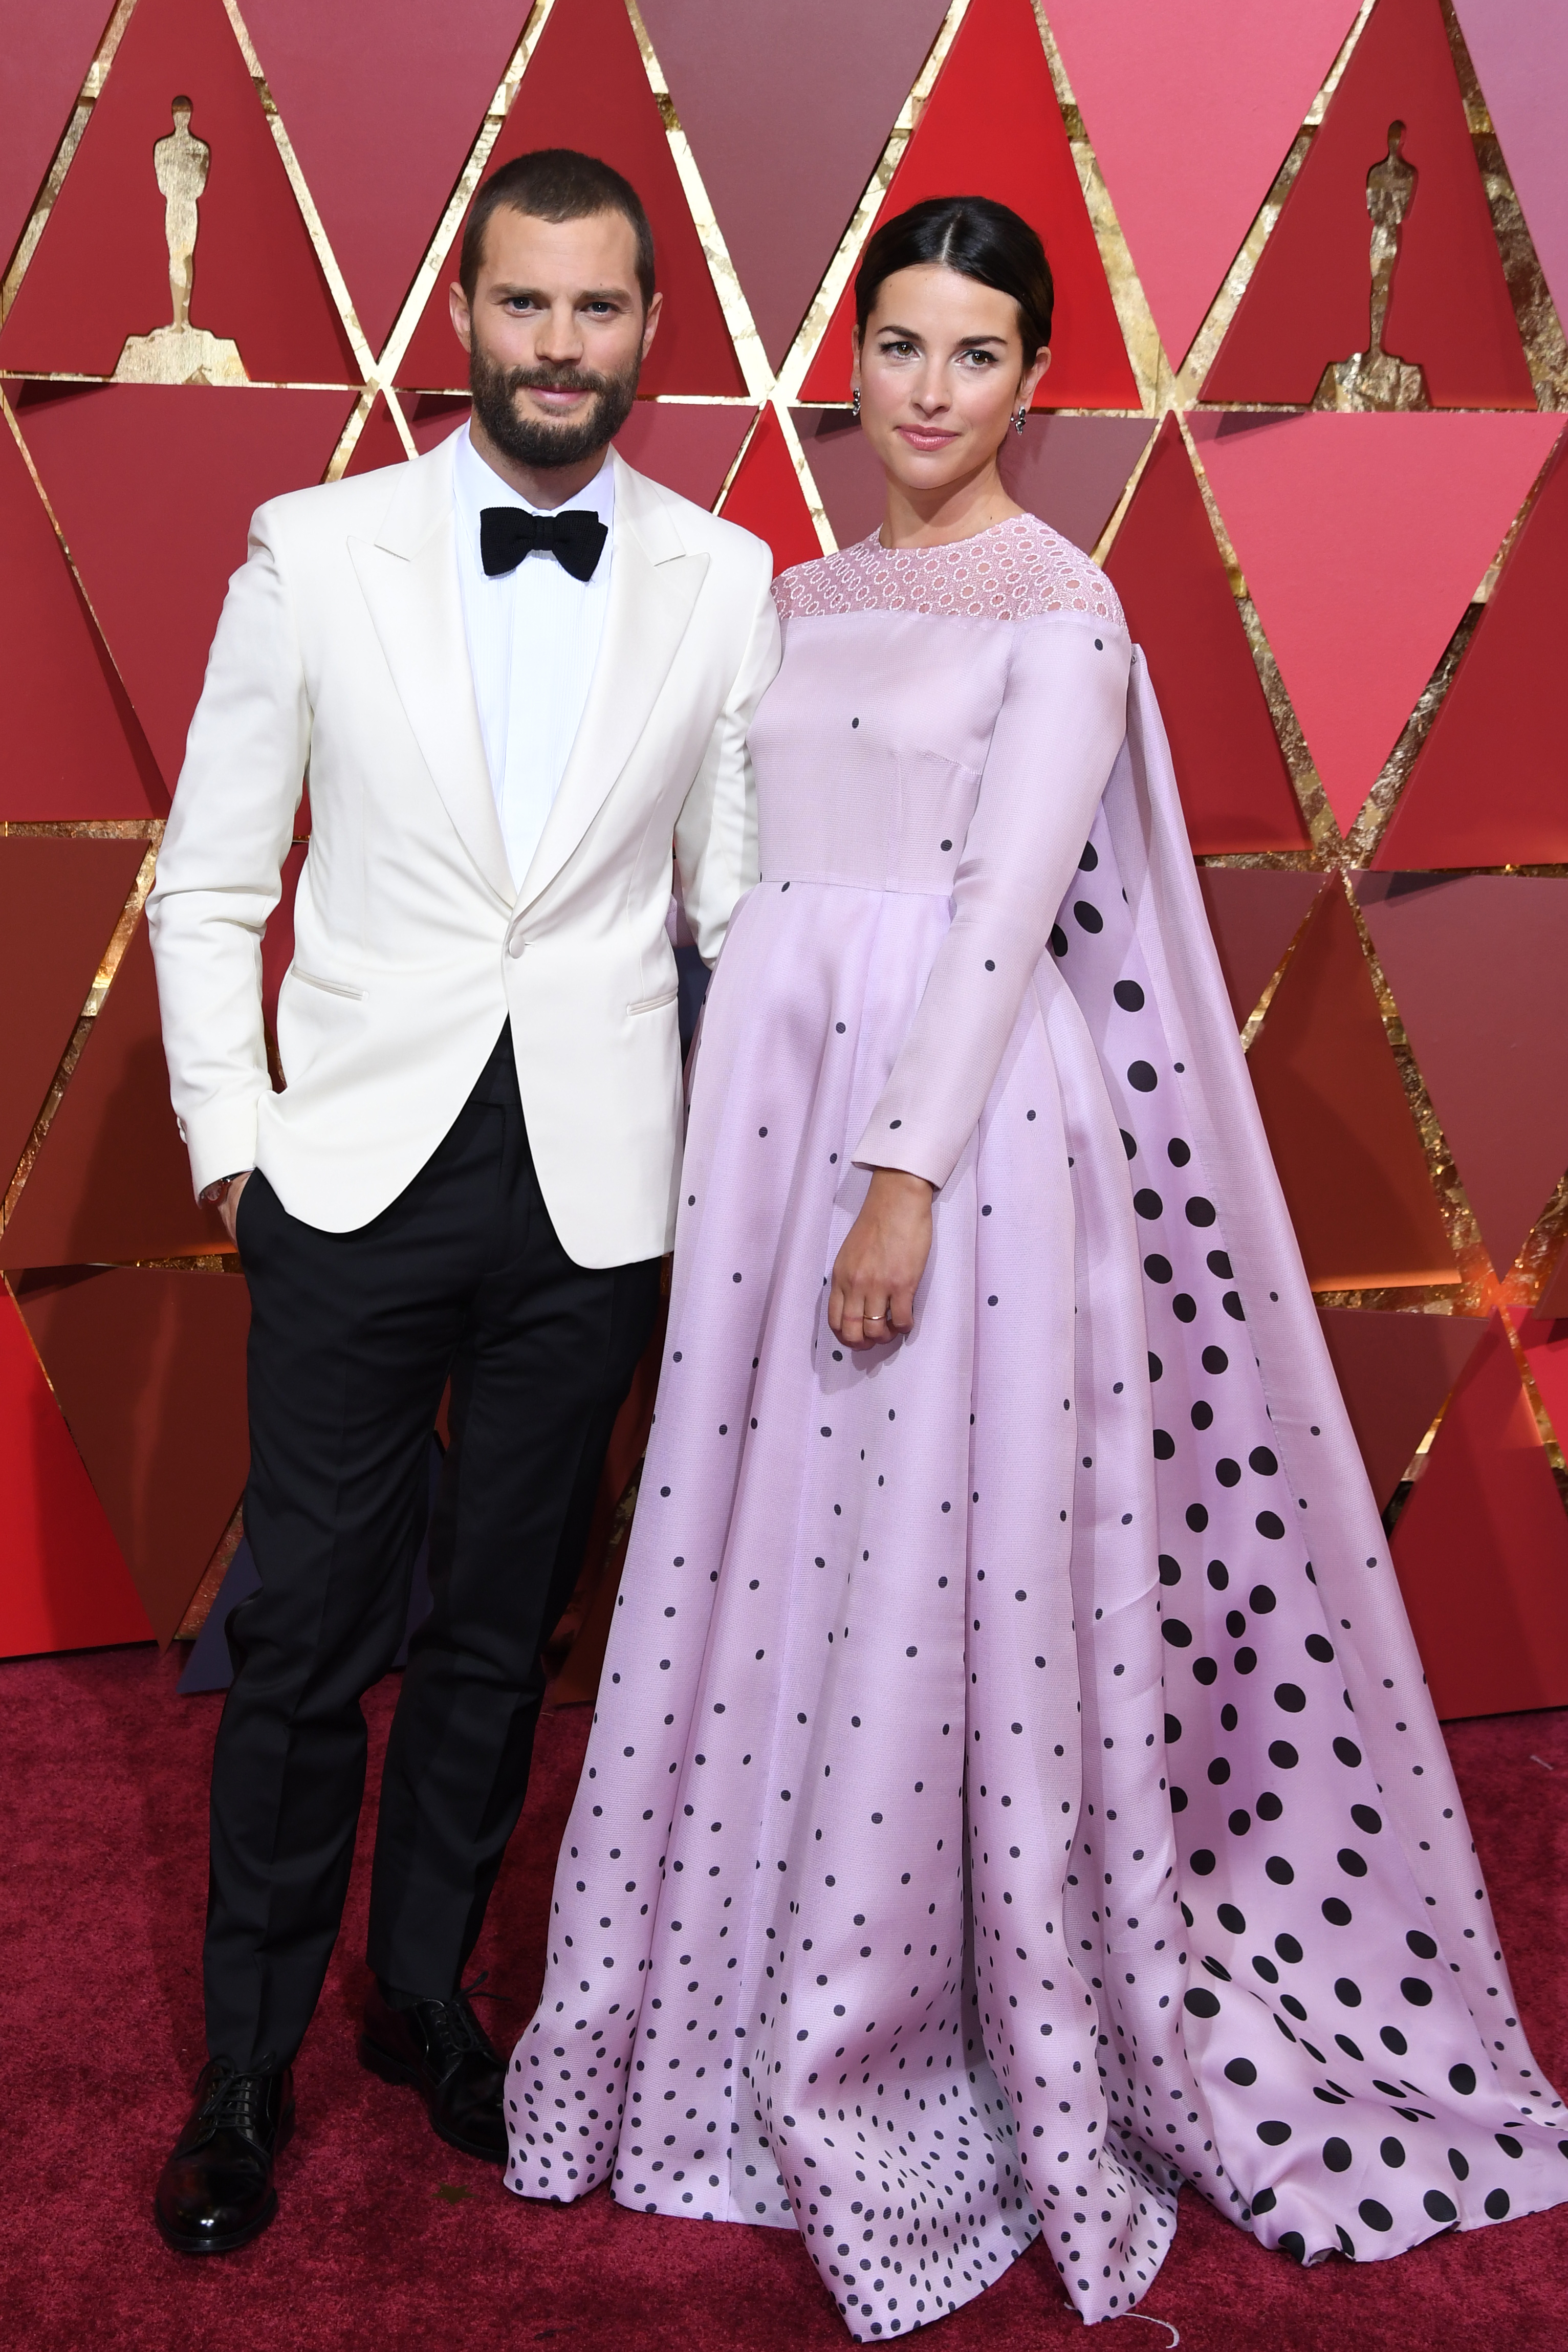 British actor Jamie Dornan (L) and his wife British actress Amelia Warner pose as they arrive on the red carpet for the 89th Oscars on February 26, 2017 in Hollywood, California.  / AFP PHOTO / ANGELA WEISS